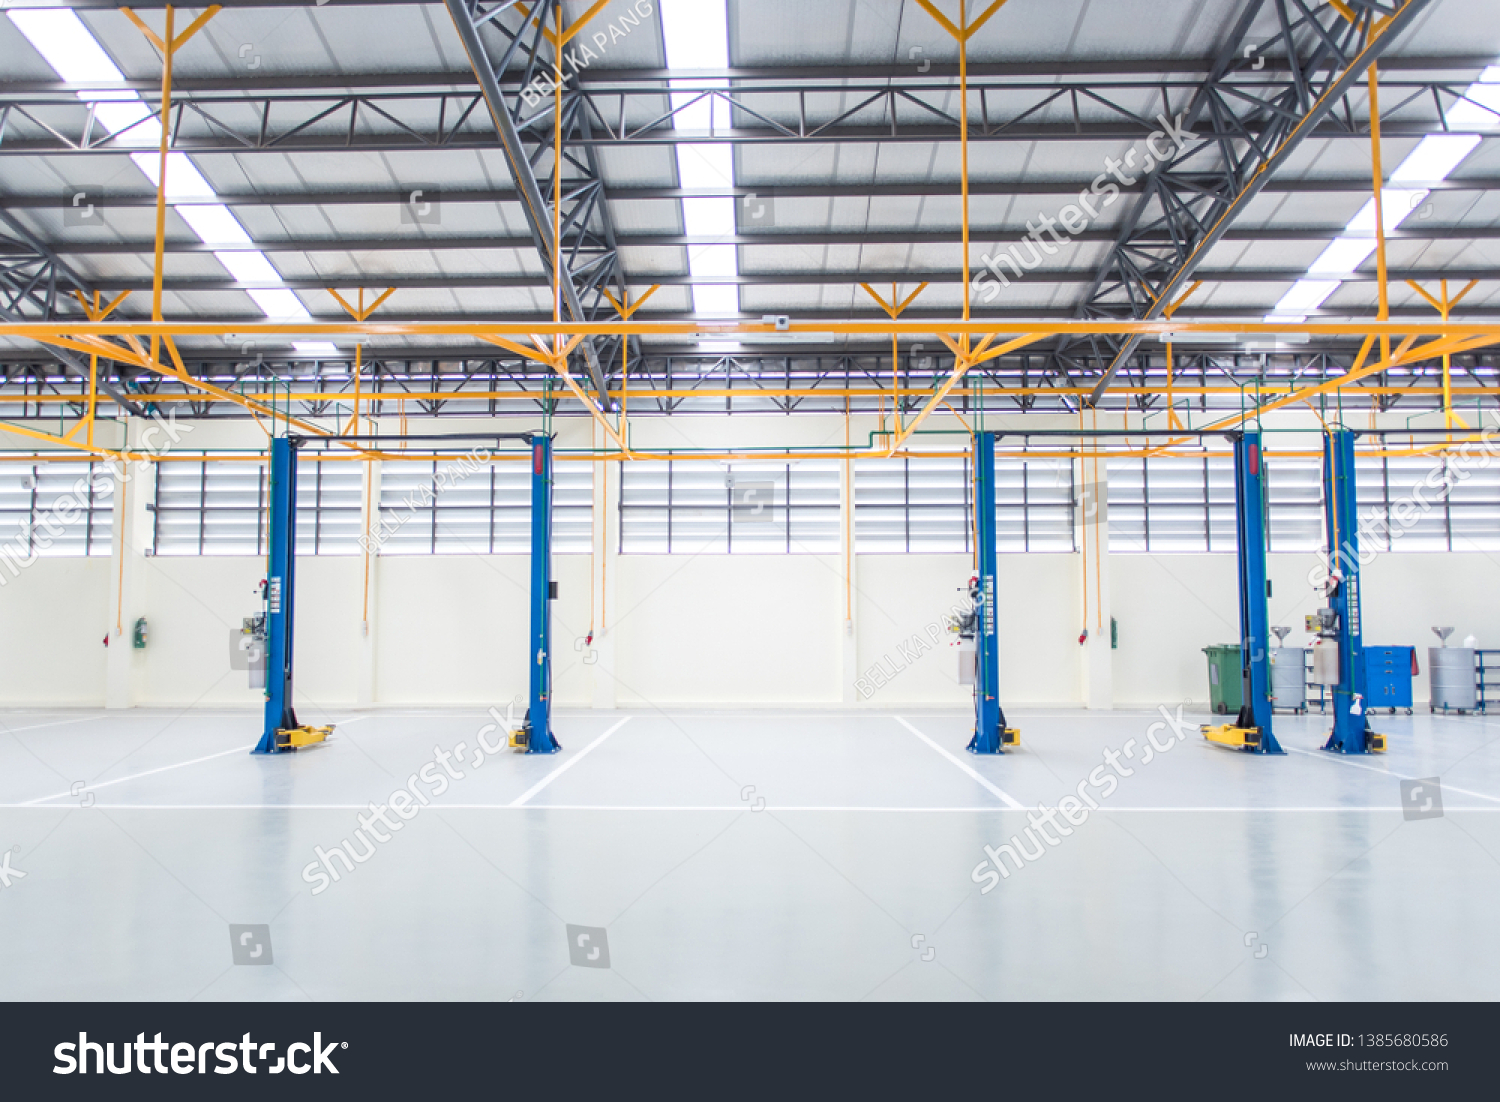 The electric lift for cars in the service put on the epoxy floor in new car factory service , Car repair service center blurred  background for industry  #1385680586